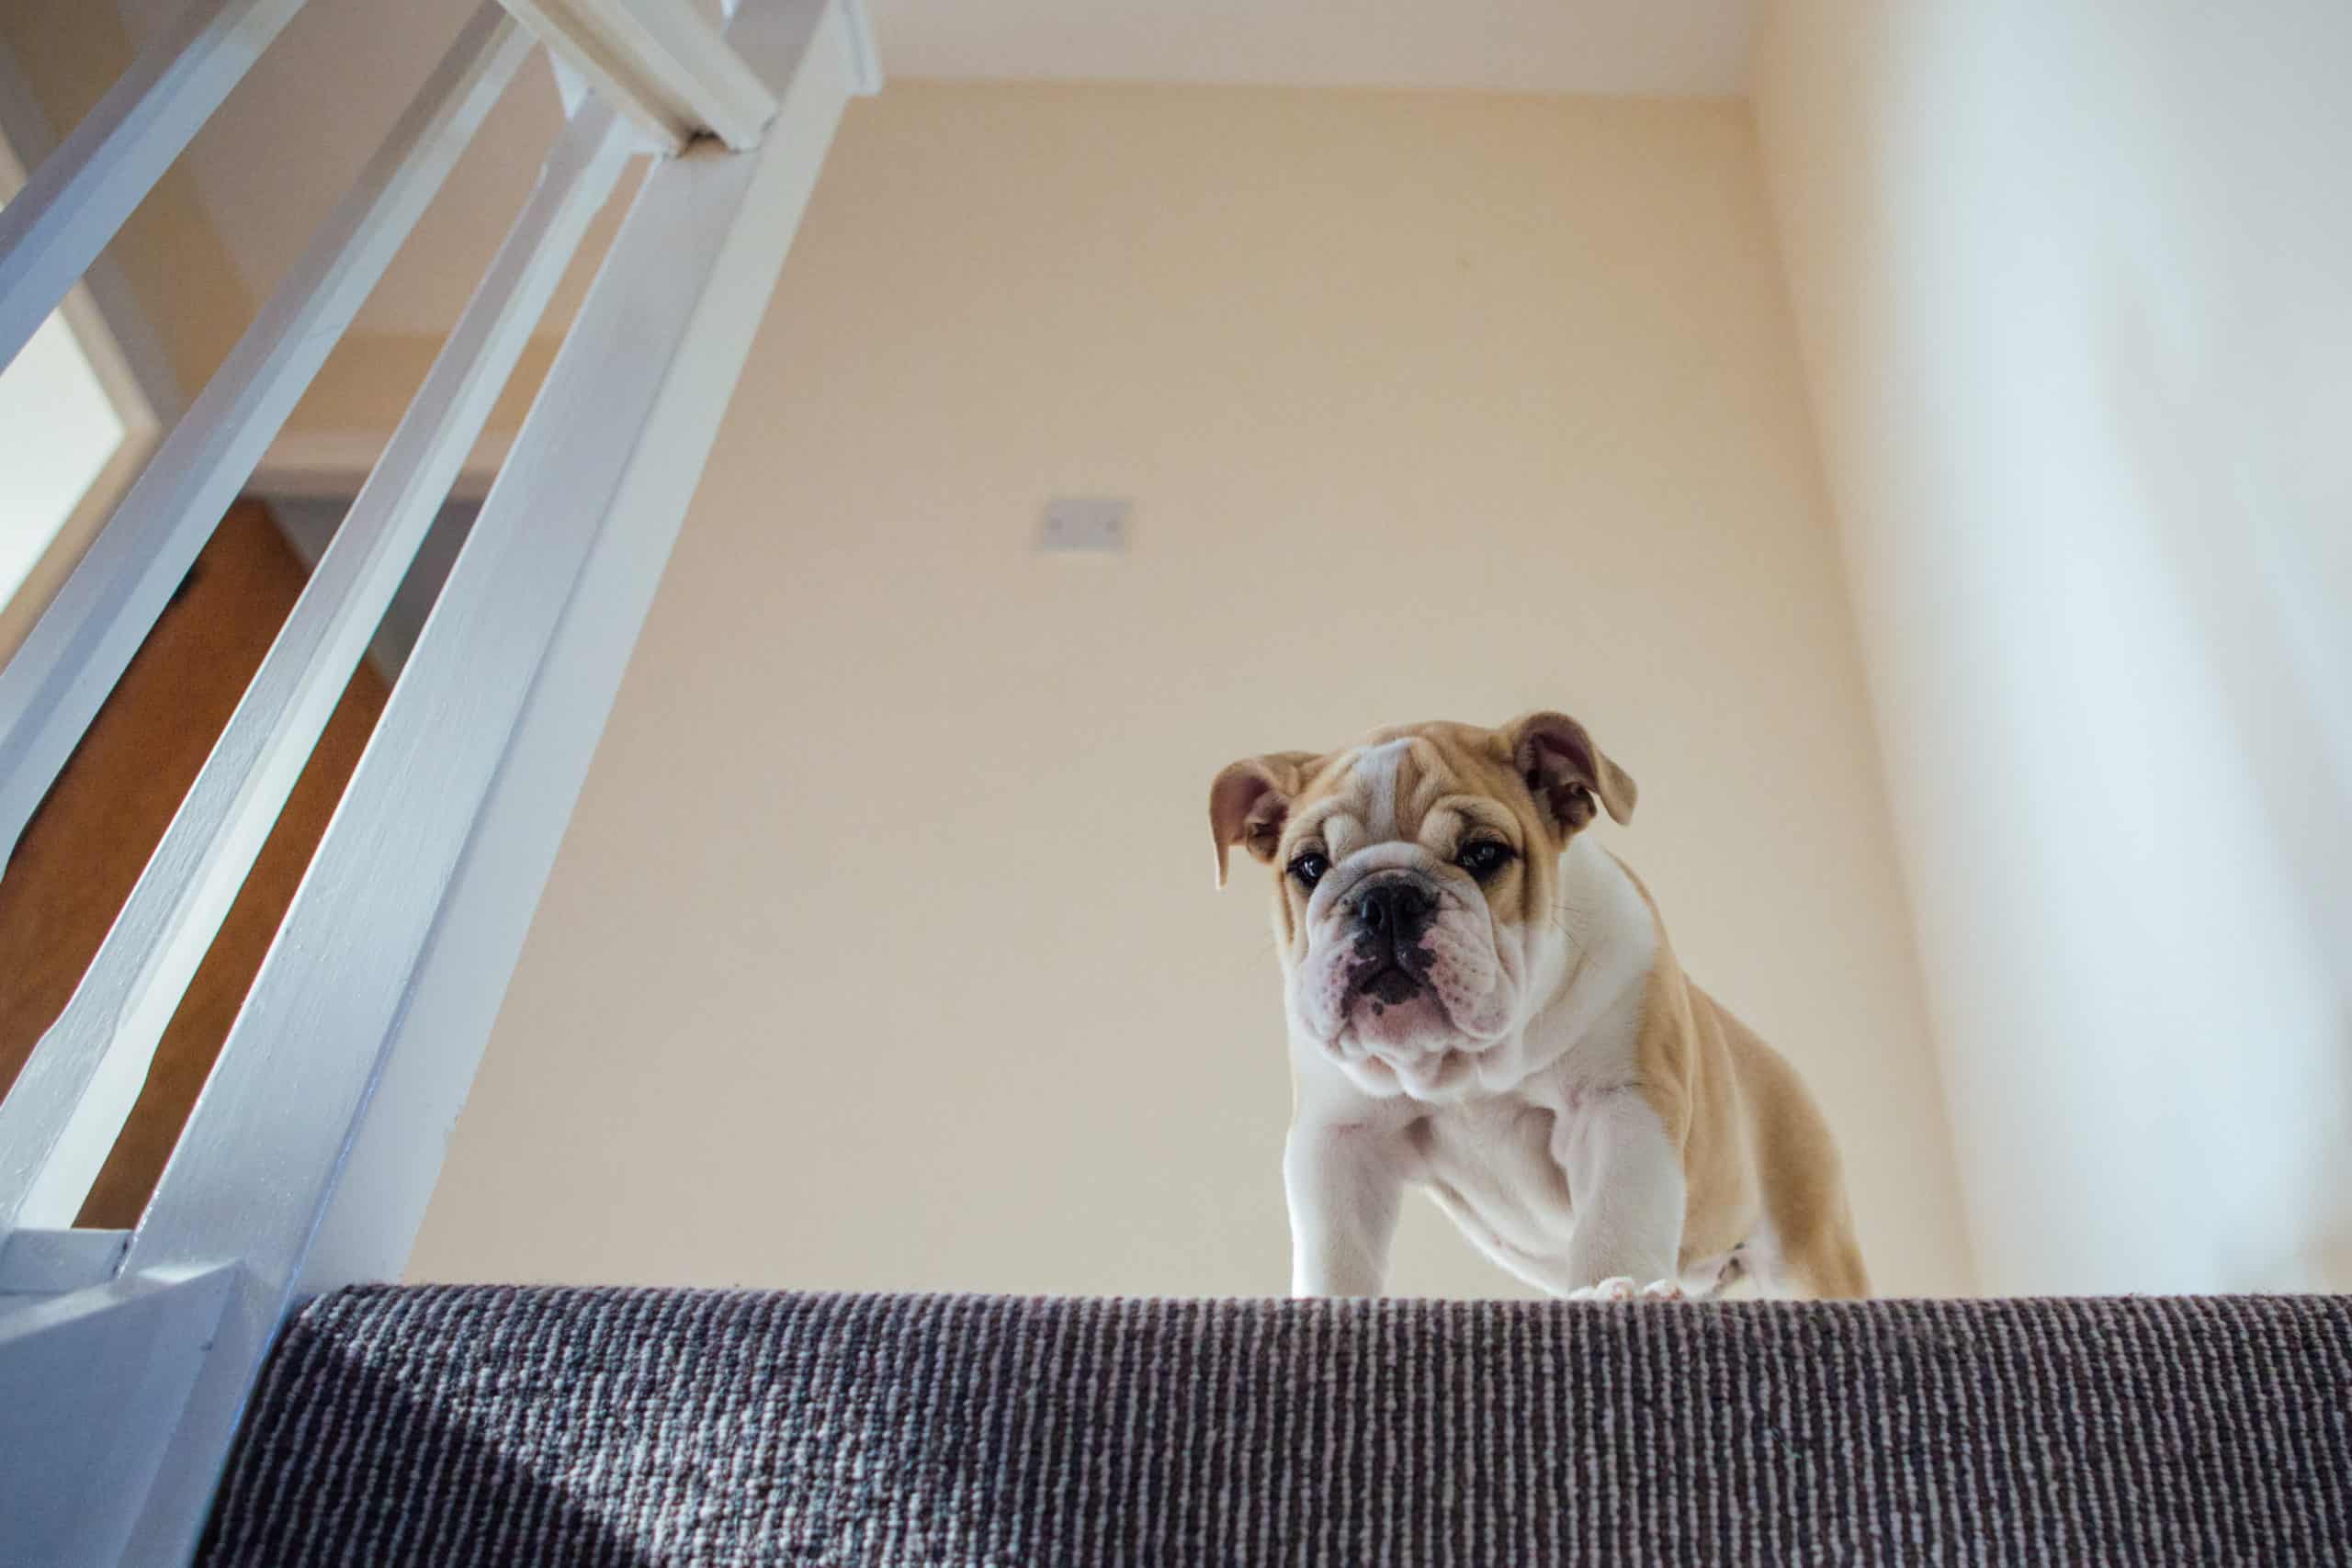 Can a dog climb stairs after neutering or spaying?